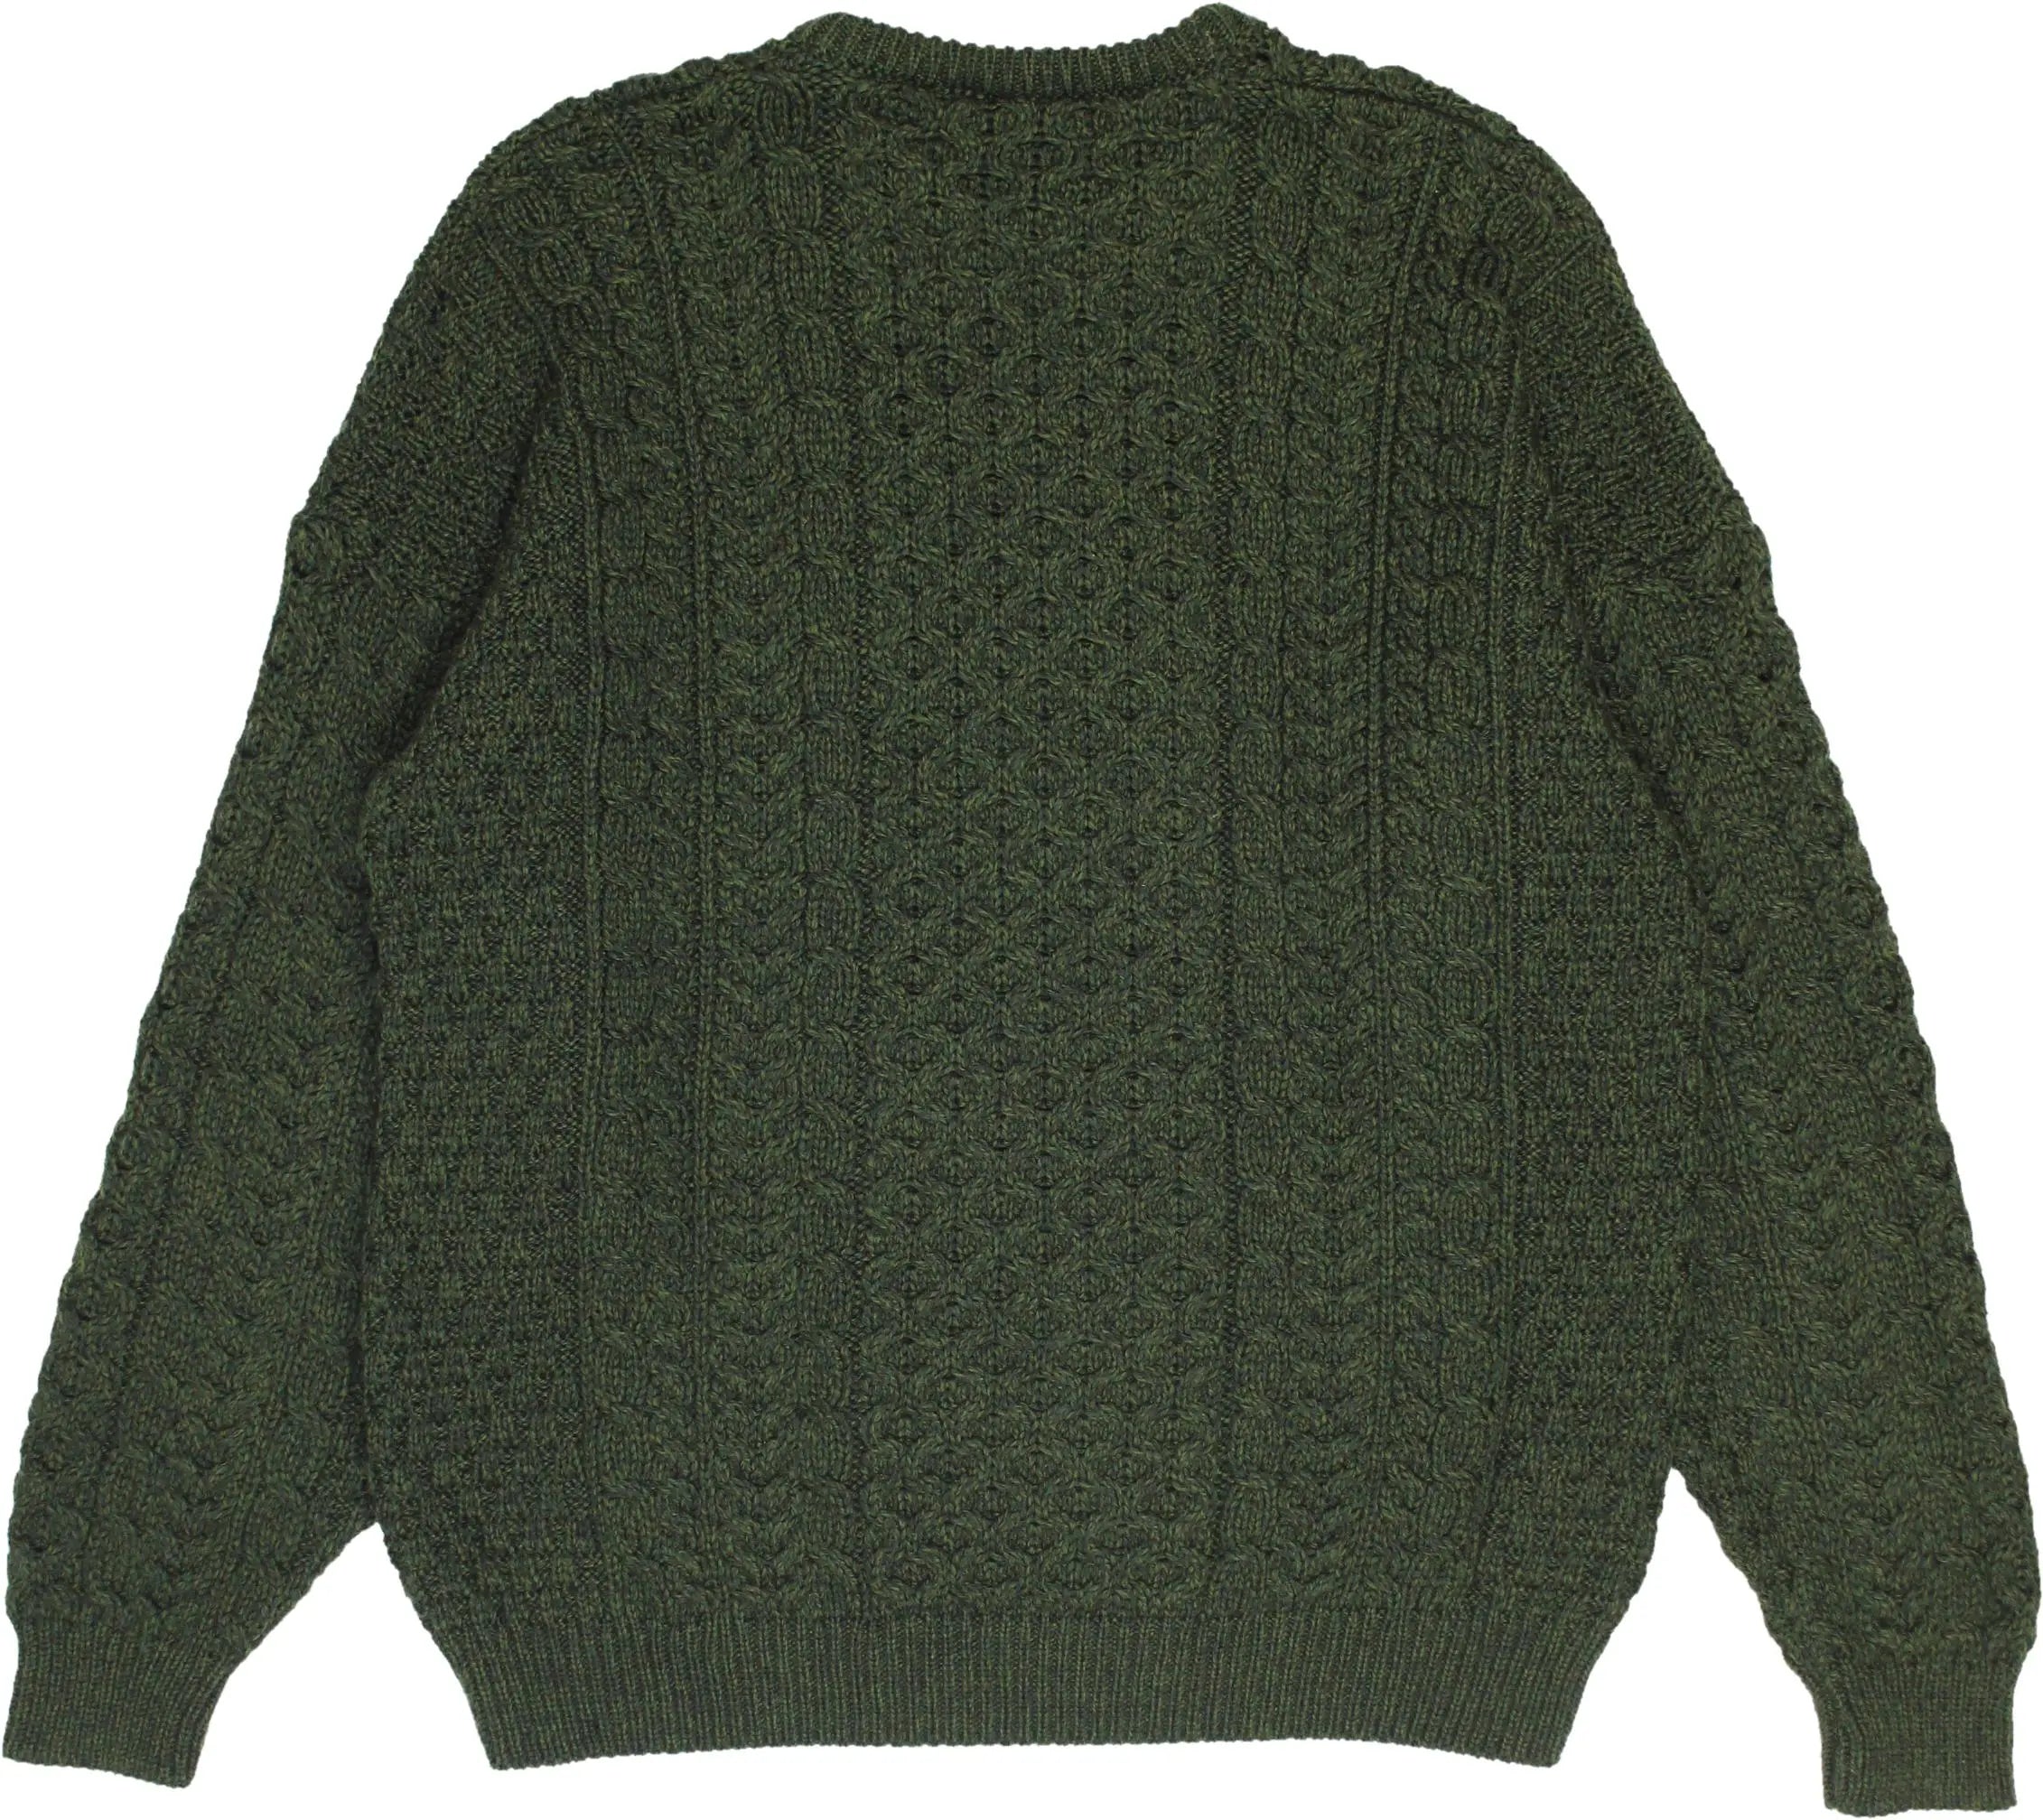 Carraig Donn - Irish Cable Jumper- ThriftTale.com - Vintage and second handclothing